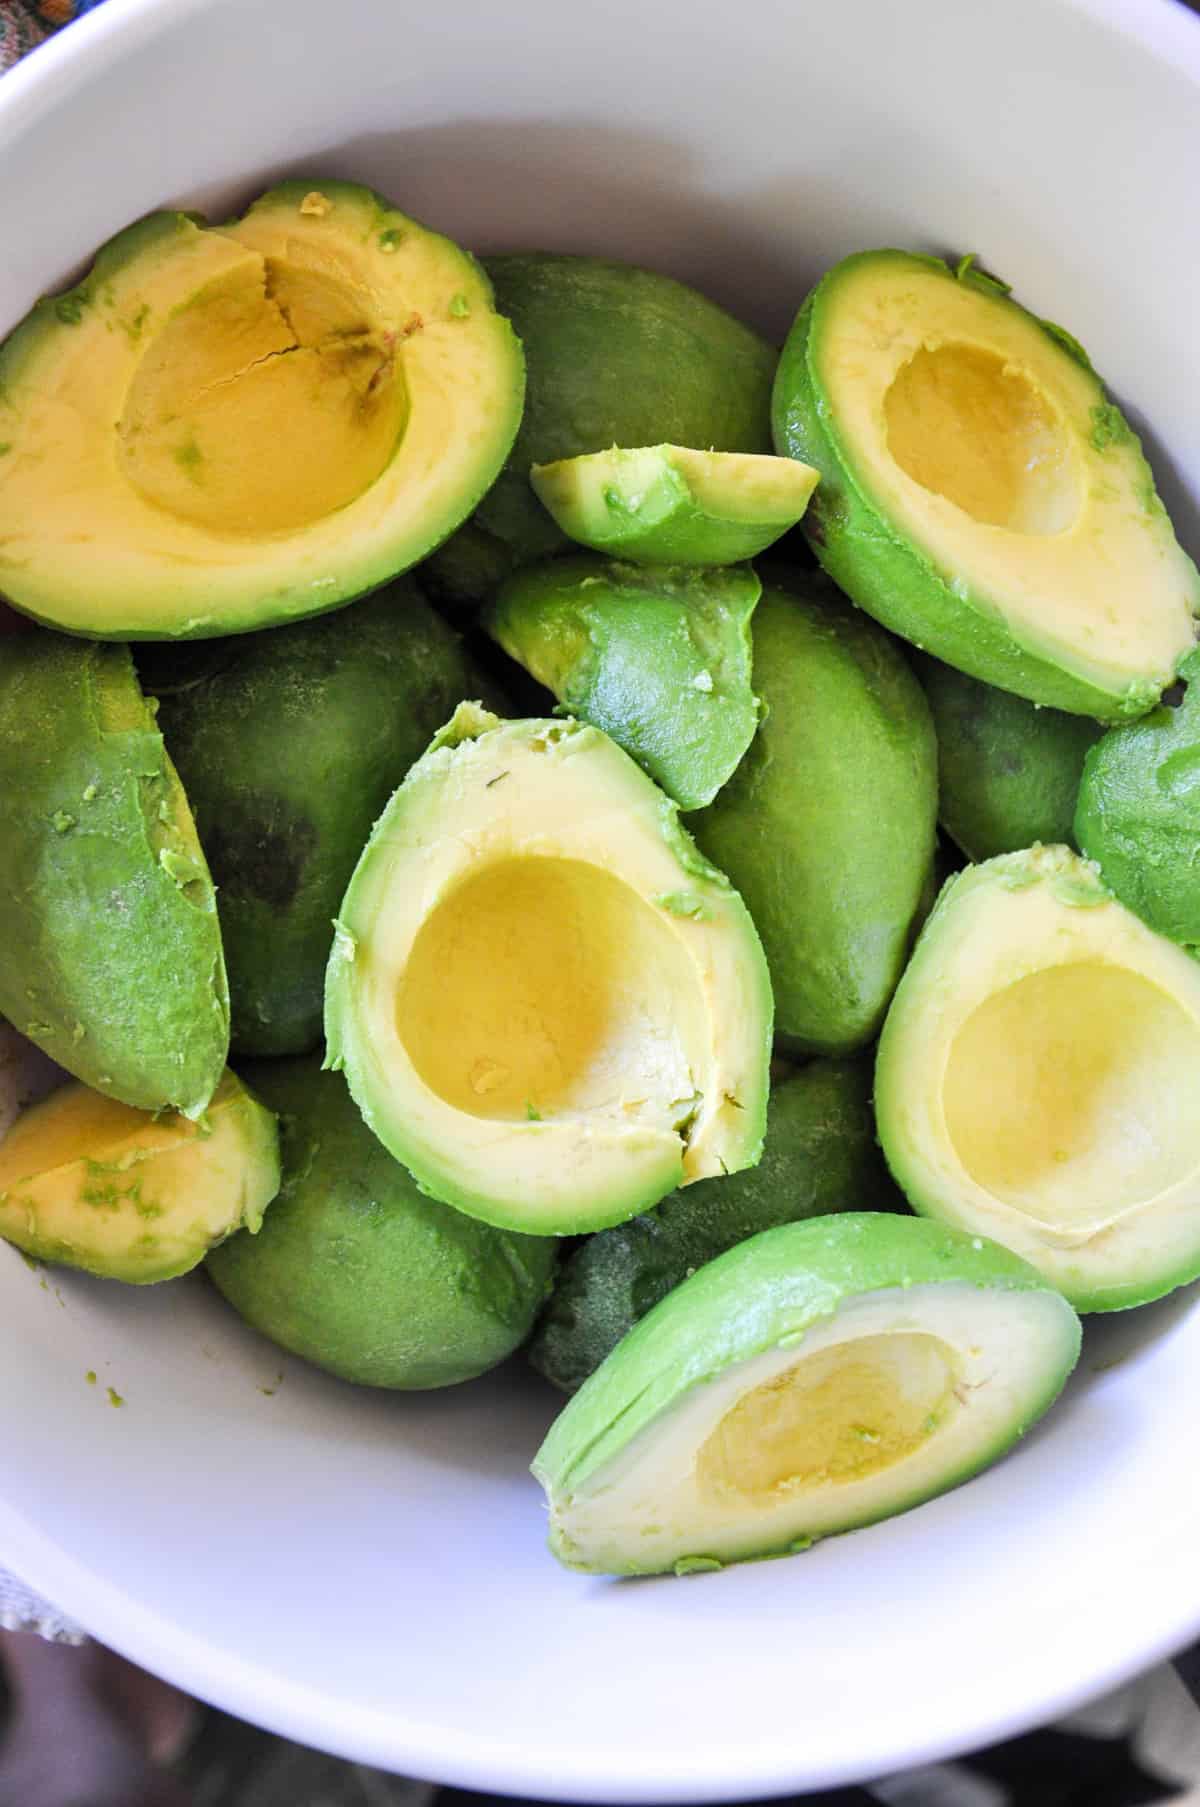 Halved avocados in a bowl